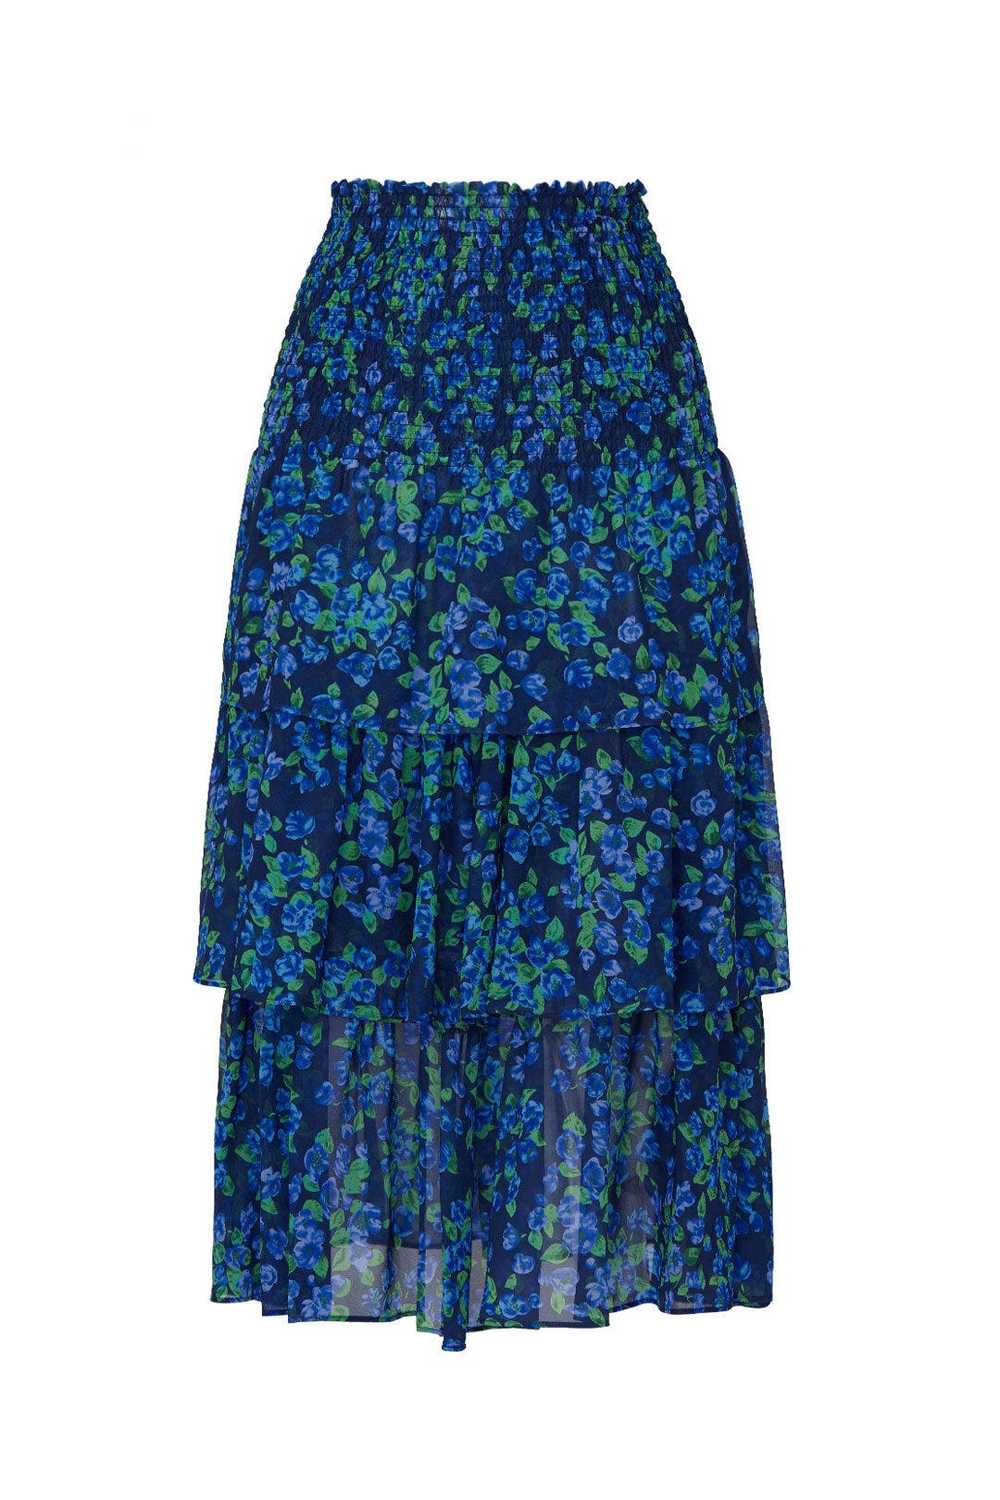 The Kooples Floral Tiered Skirt - image 4